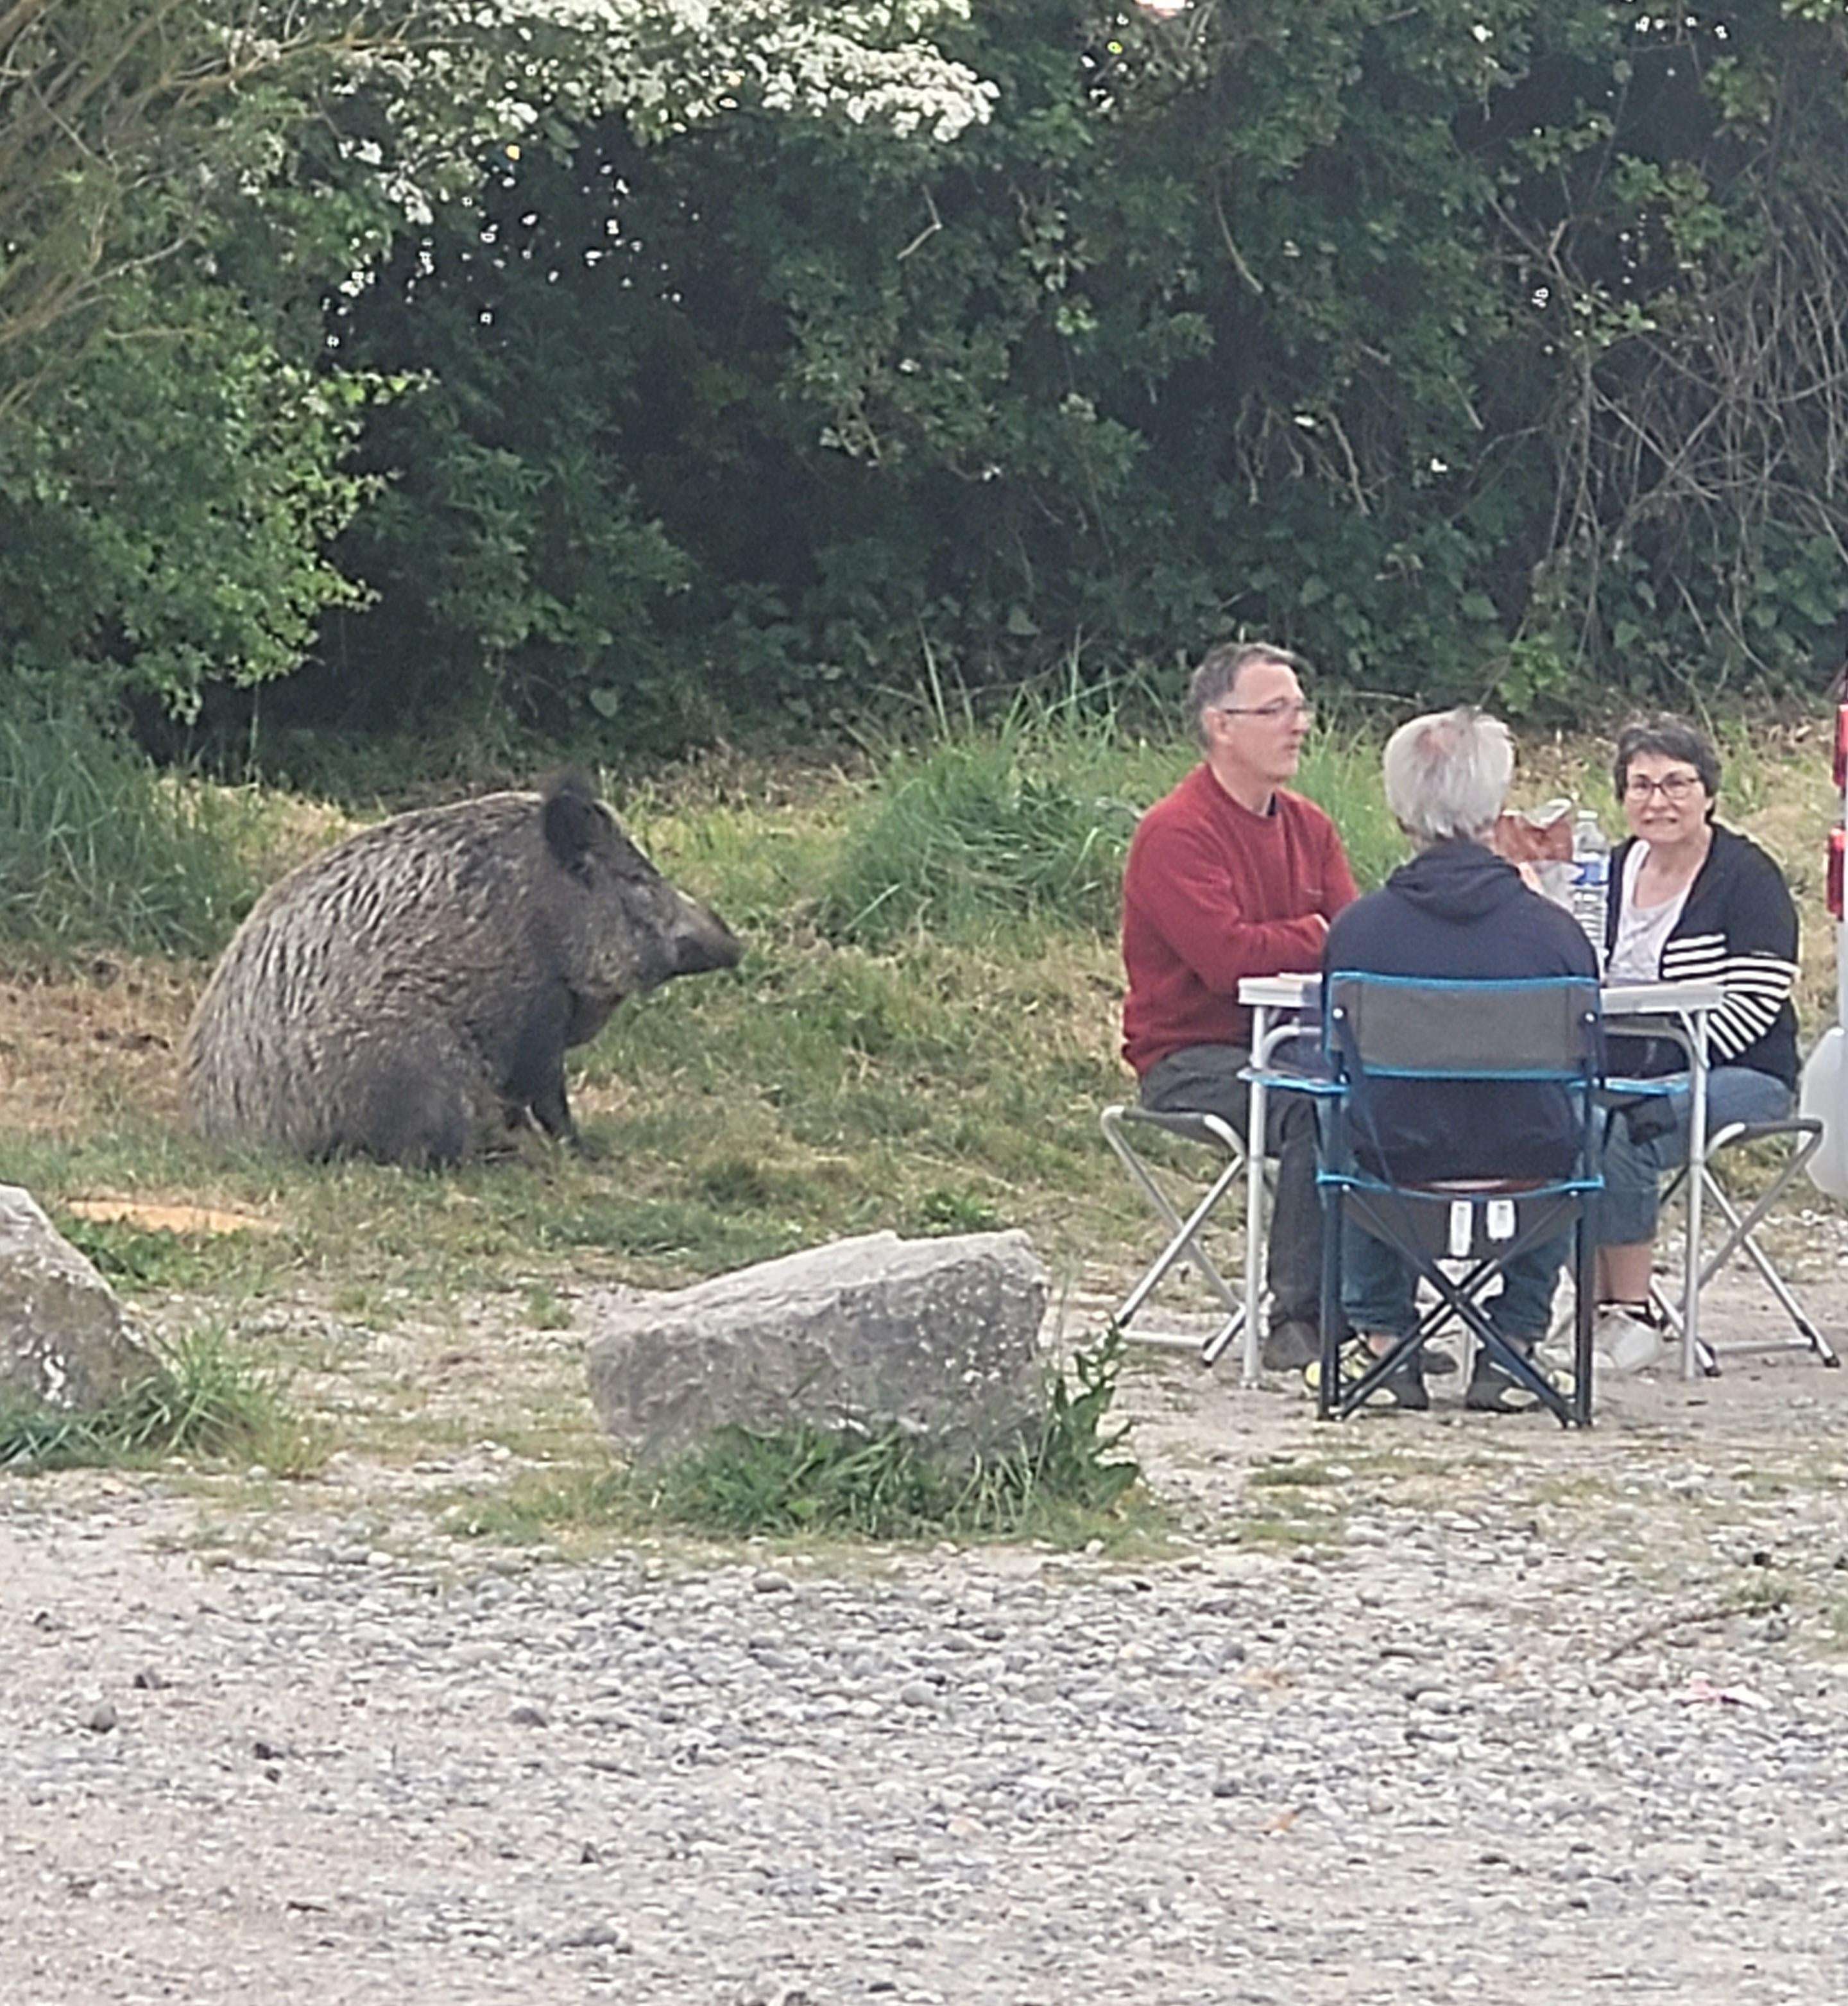 image showing [OC] Wild boar chilling with humans